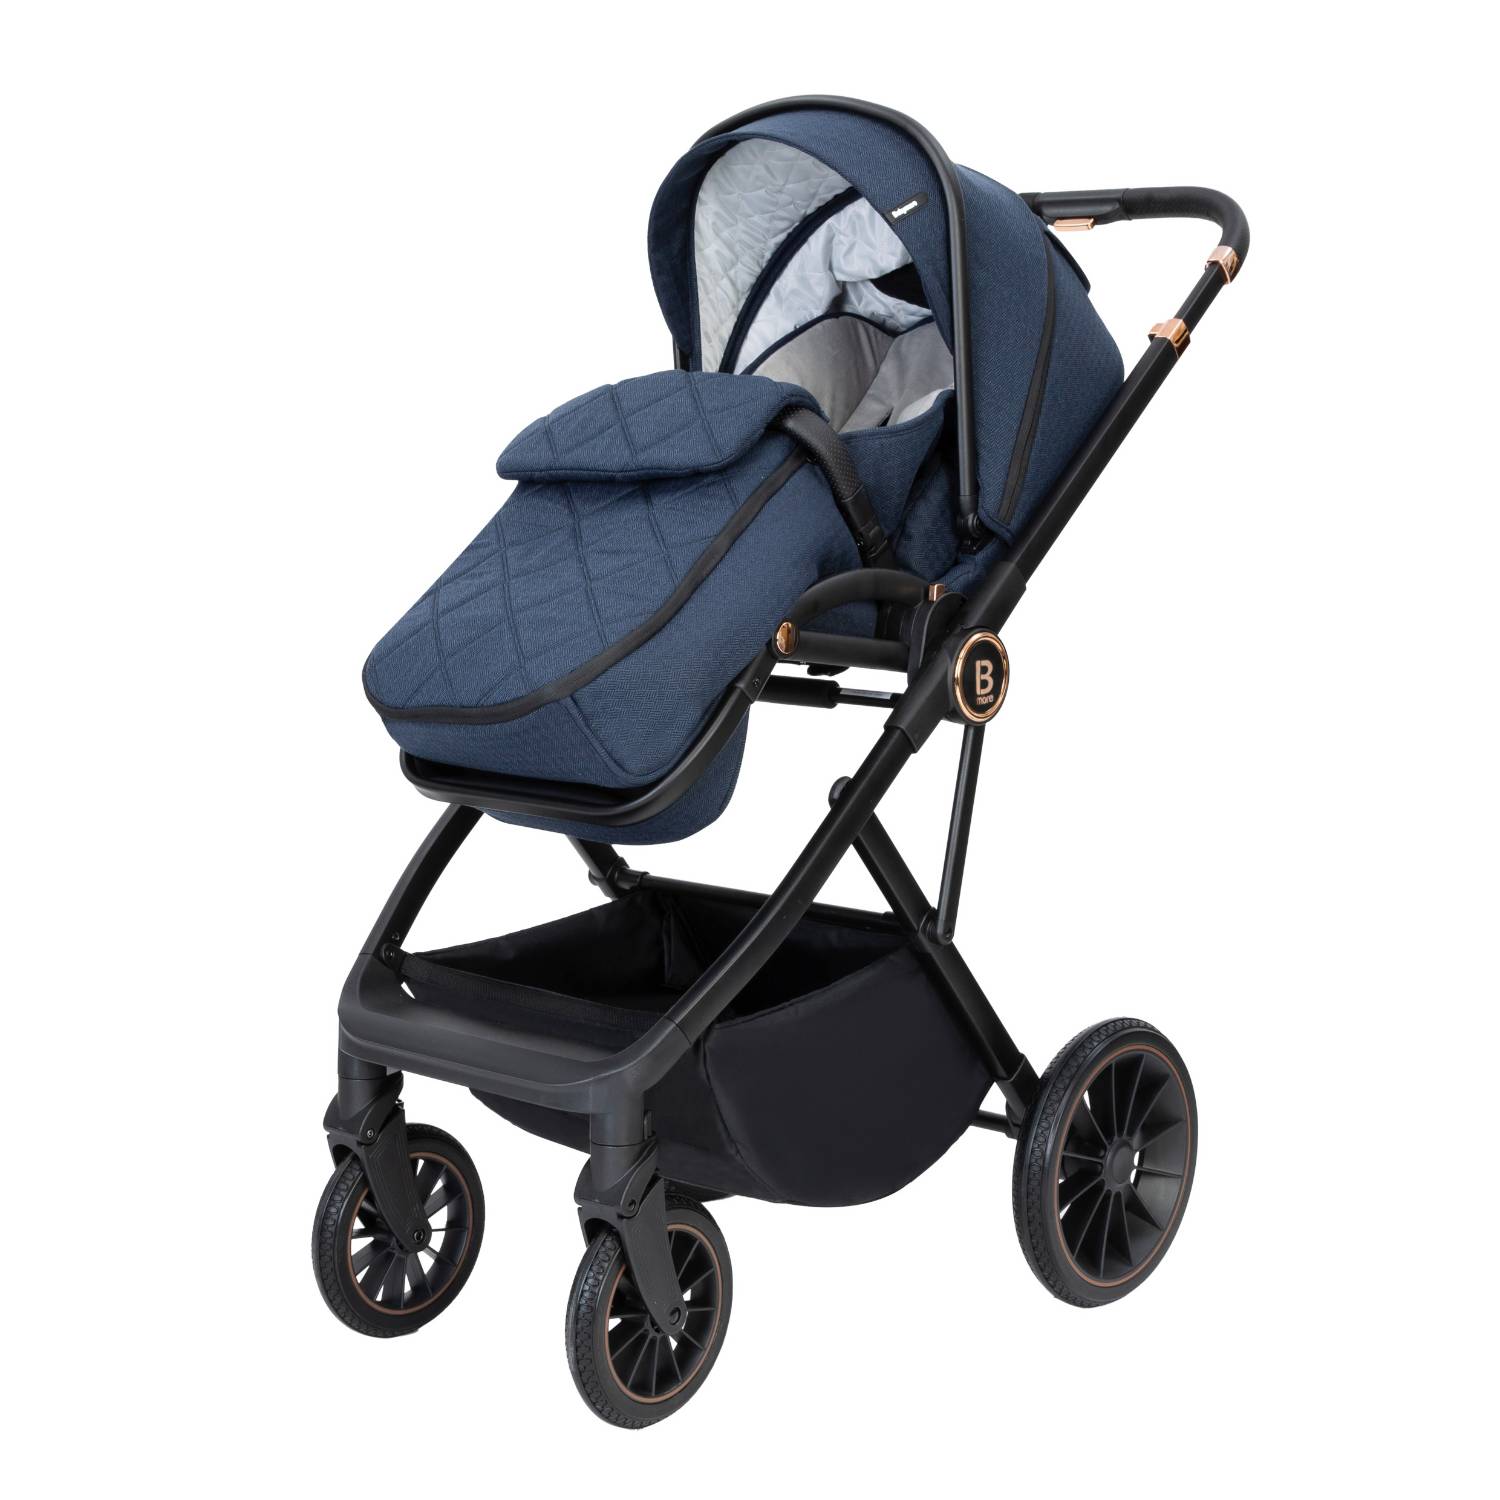 Babymore Chia with Seat Unit and footmuff attached in Midnight Blue colour